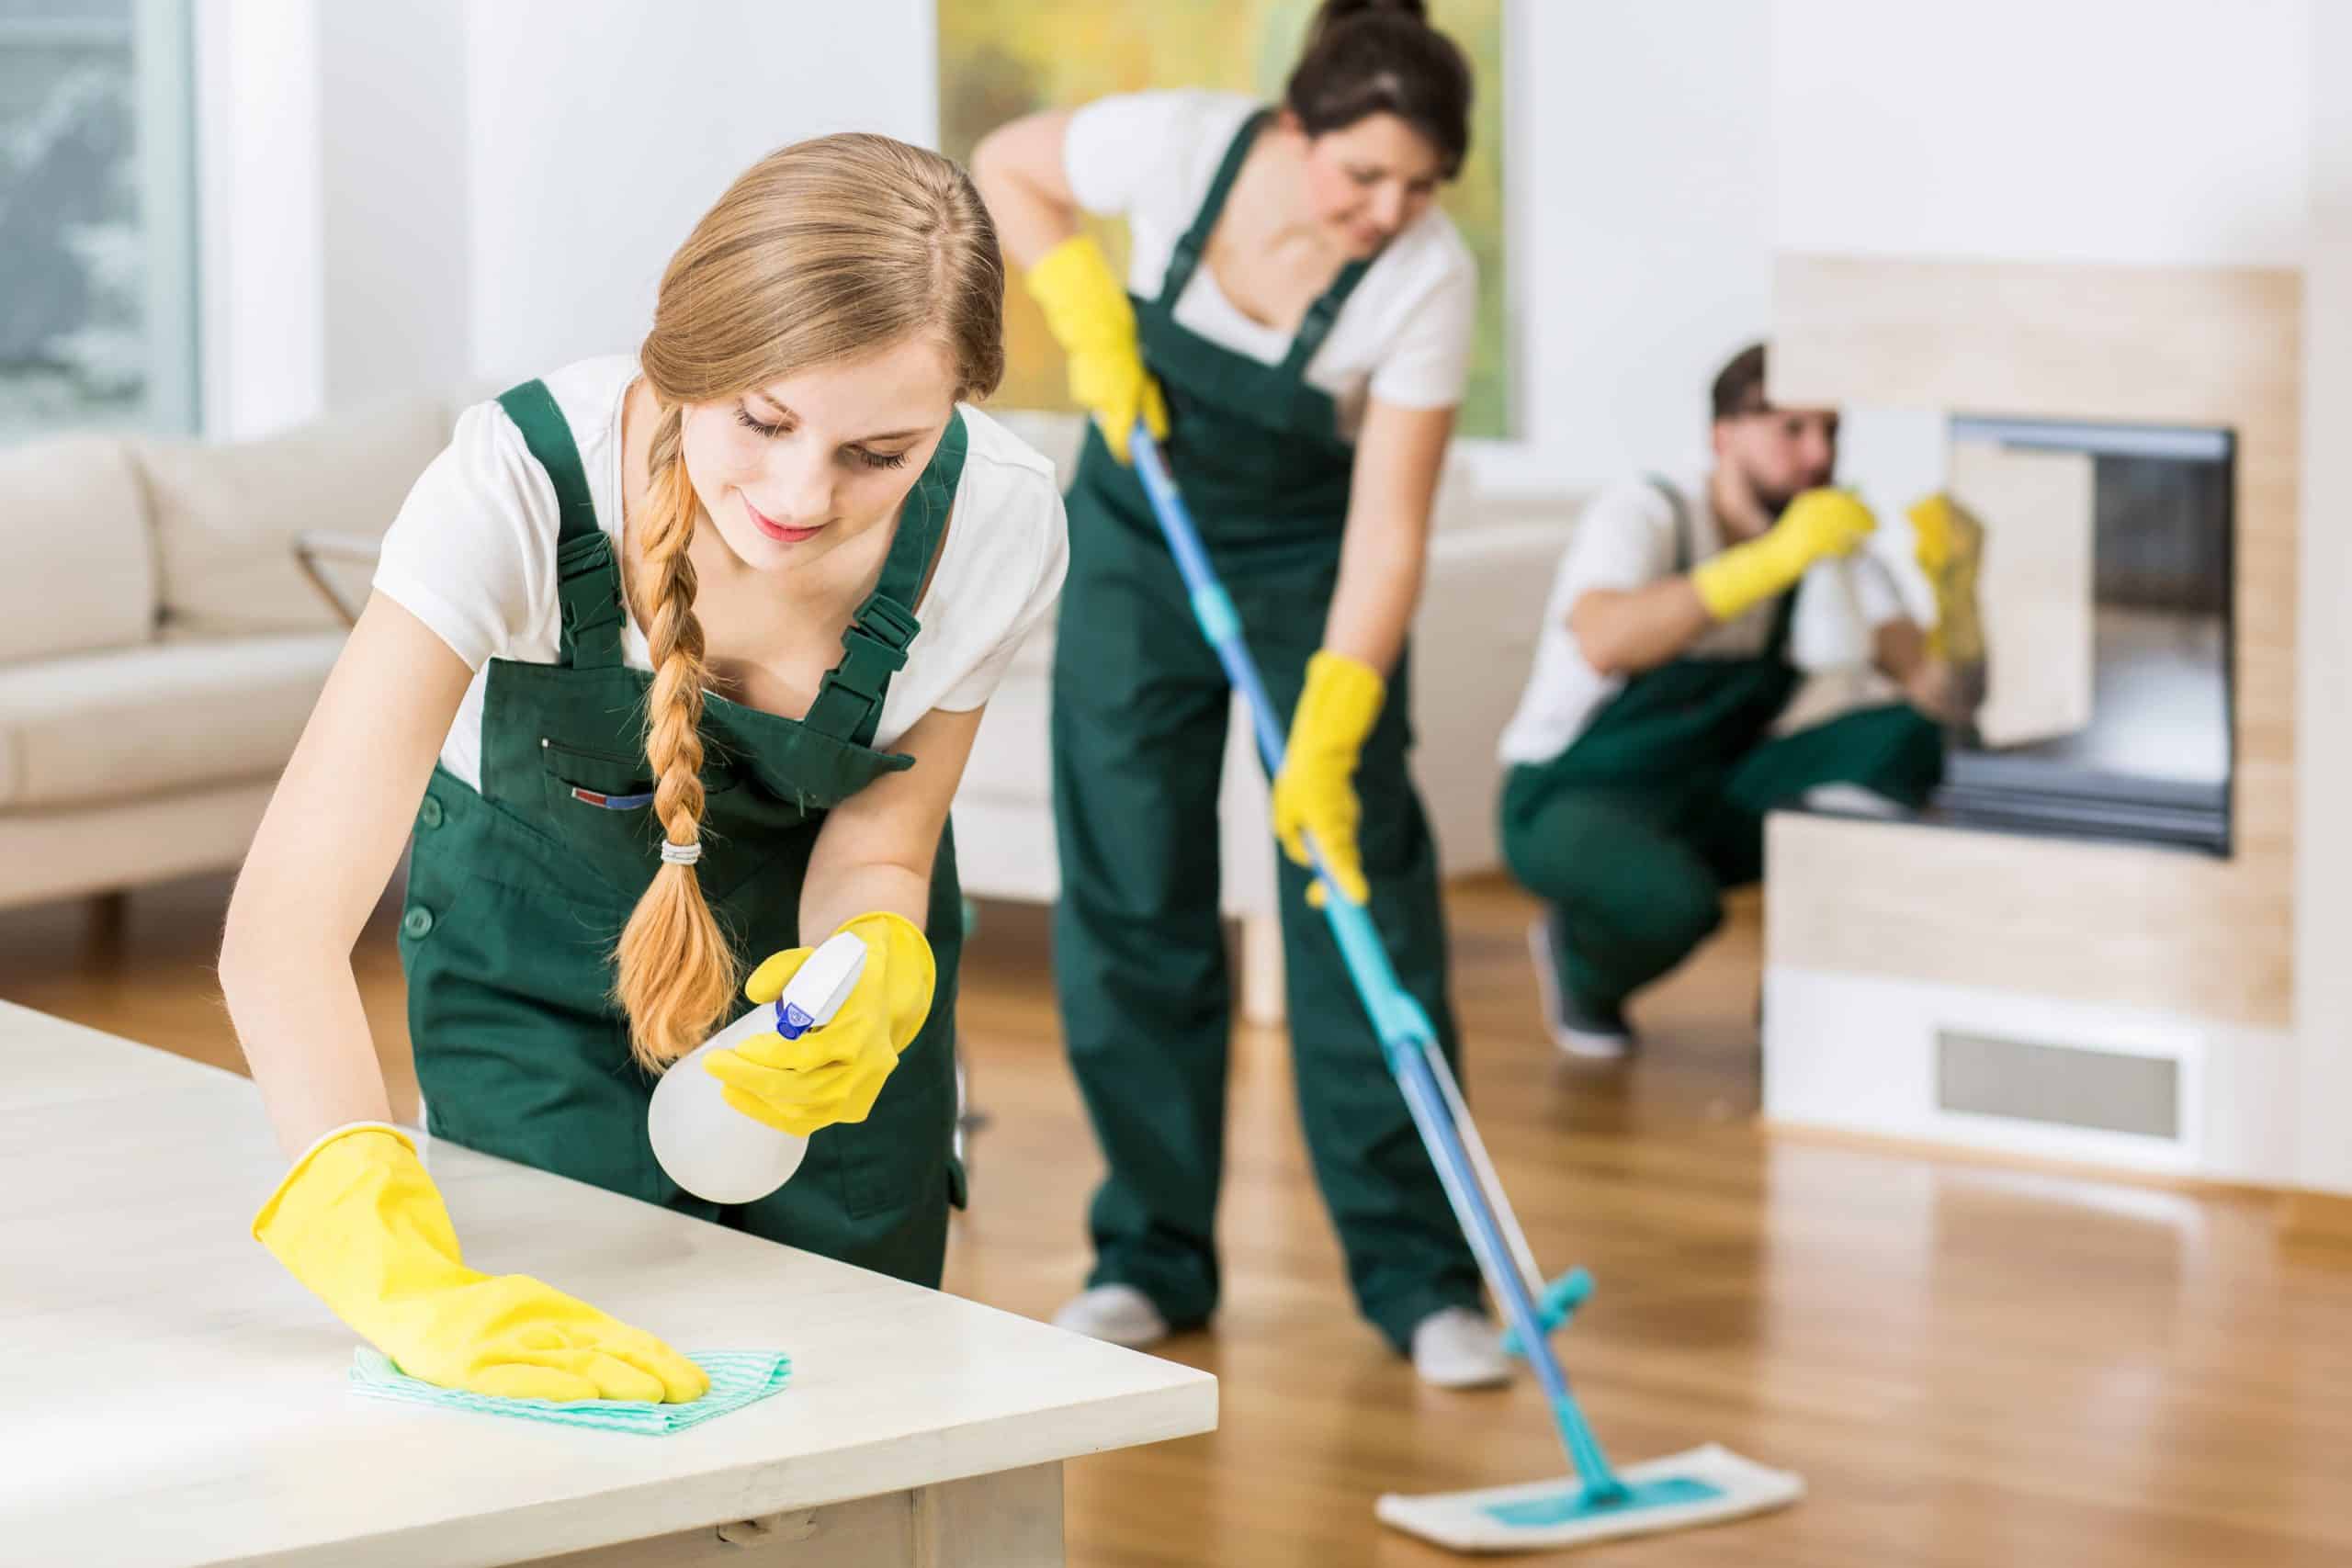 Spend time to save money - Team of 3 house cleaners in green overalls clean a living room